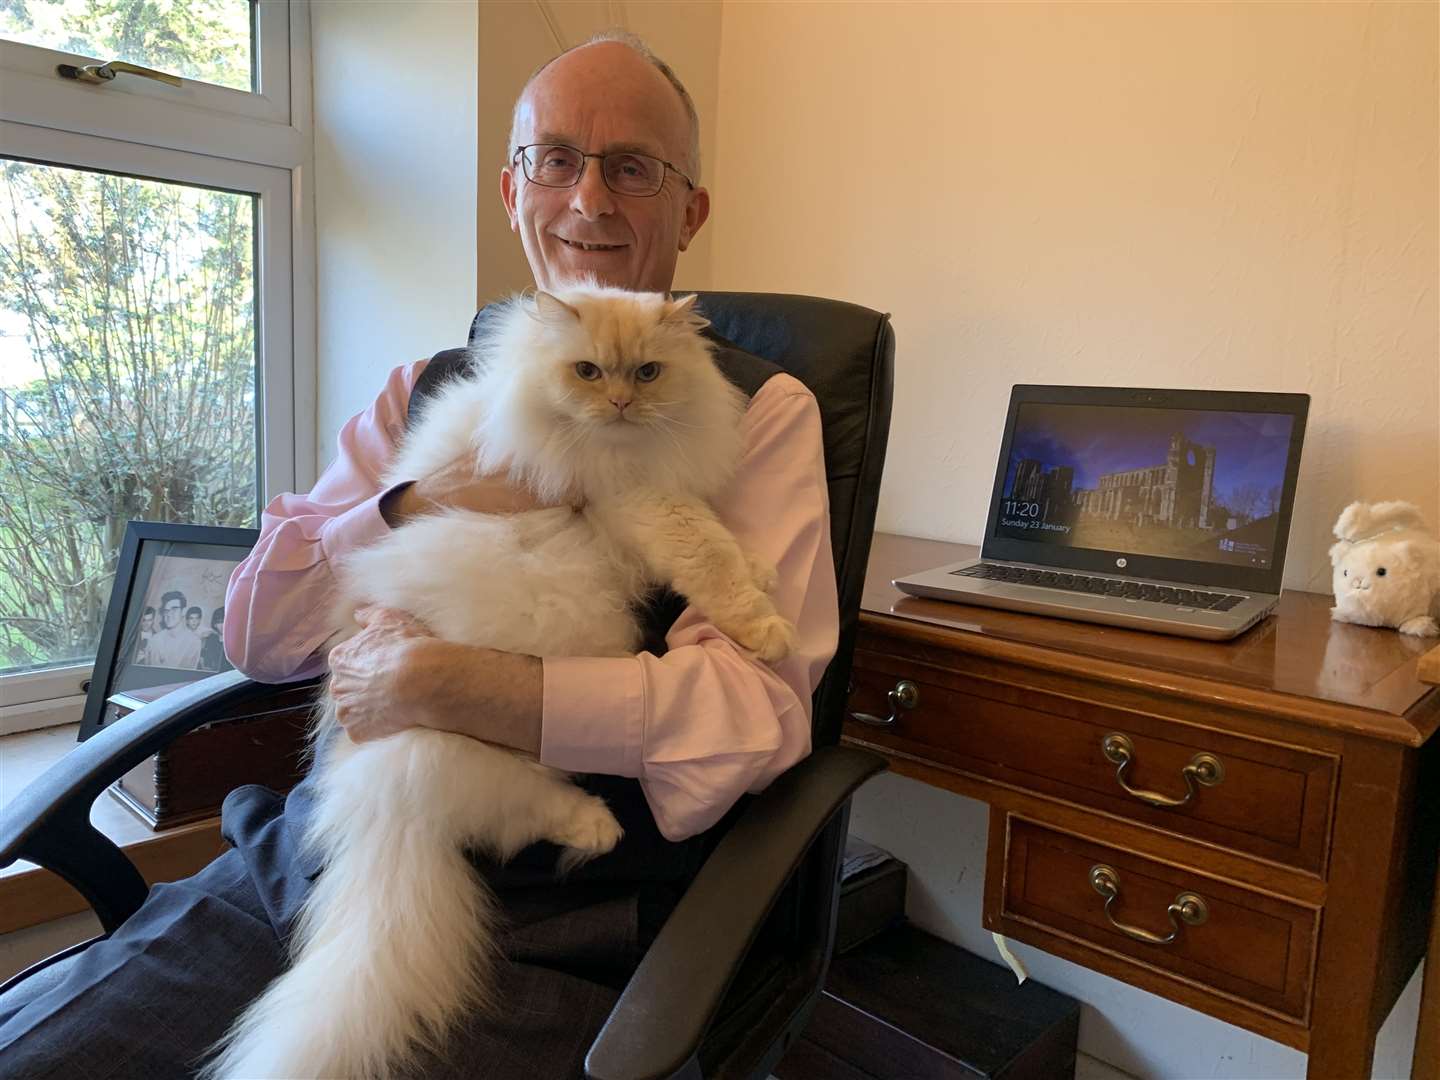 David Patterson and his cat